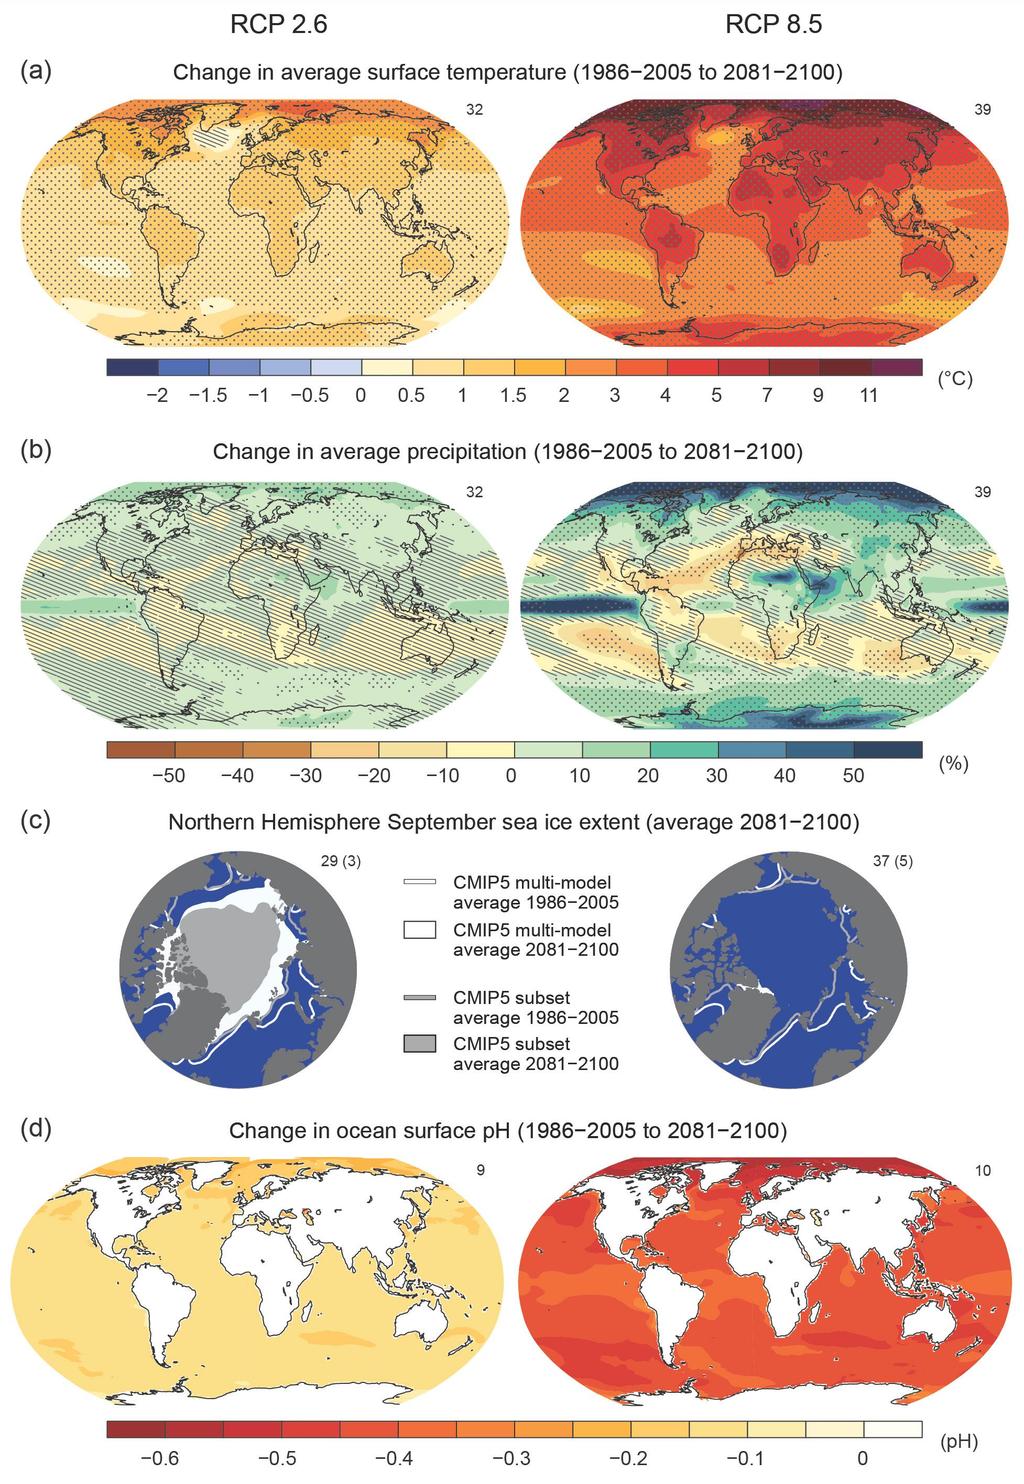 Spatial distribution of surface temperature changes Multi-model mean of surface temperature change for the scenarios RCP2.6 and RCP8.5 in 2081 2100 relative to 1986-2005.